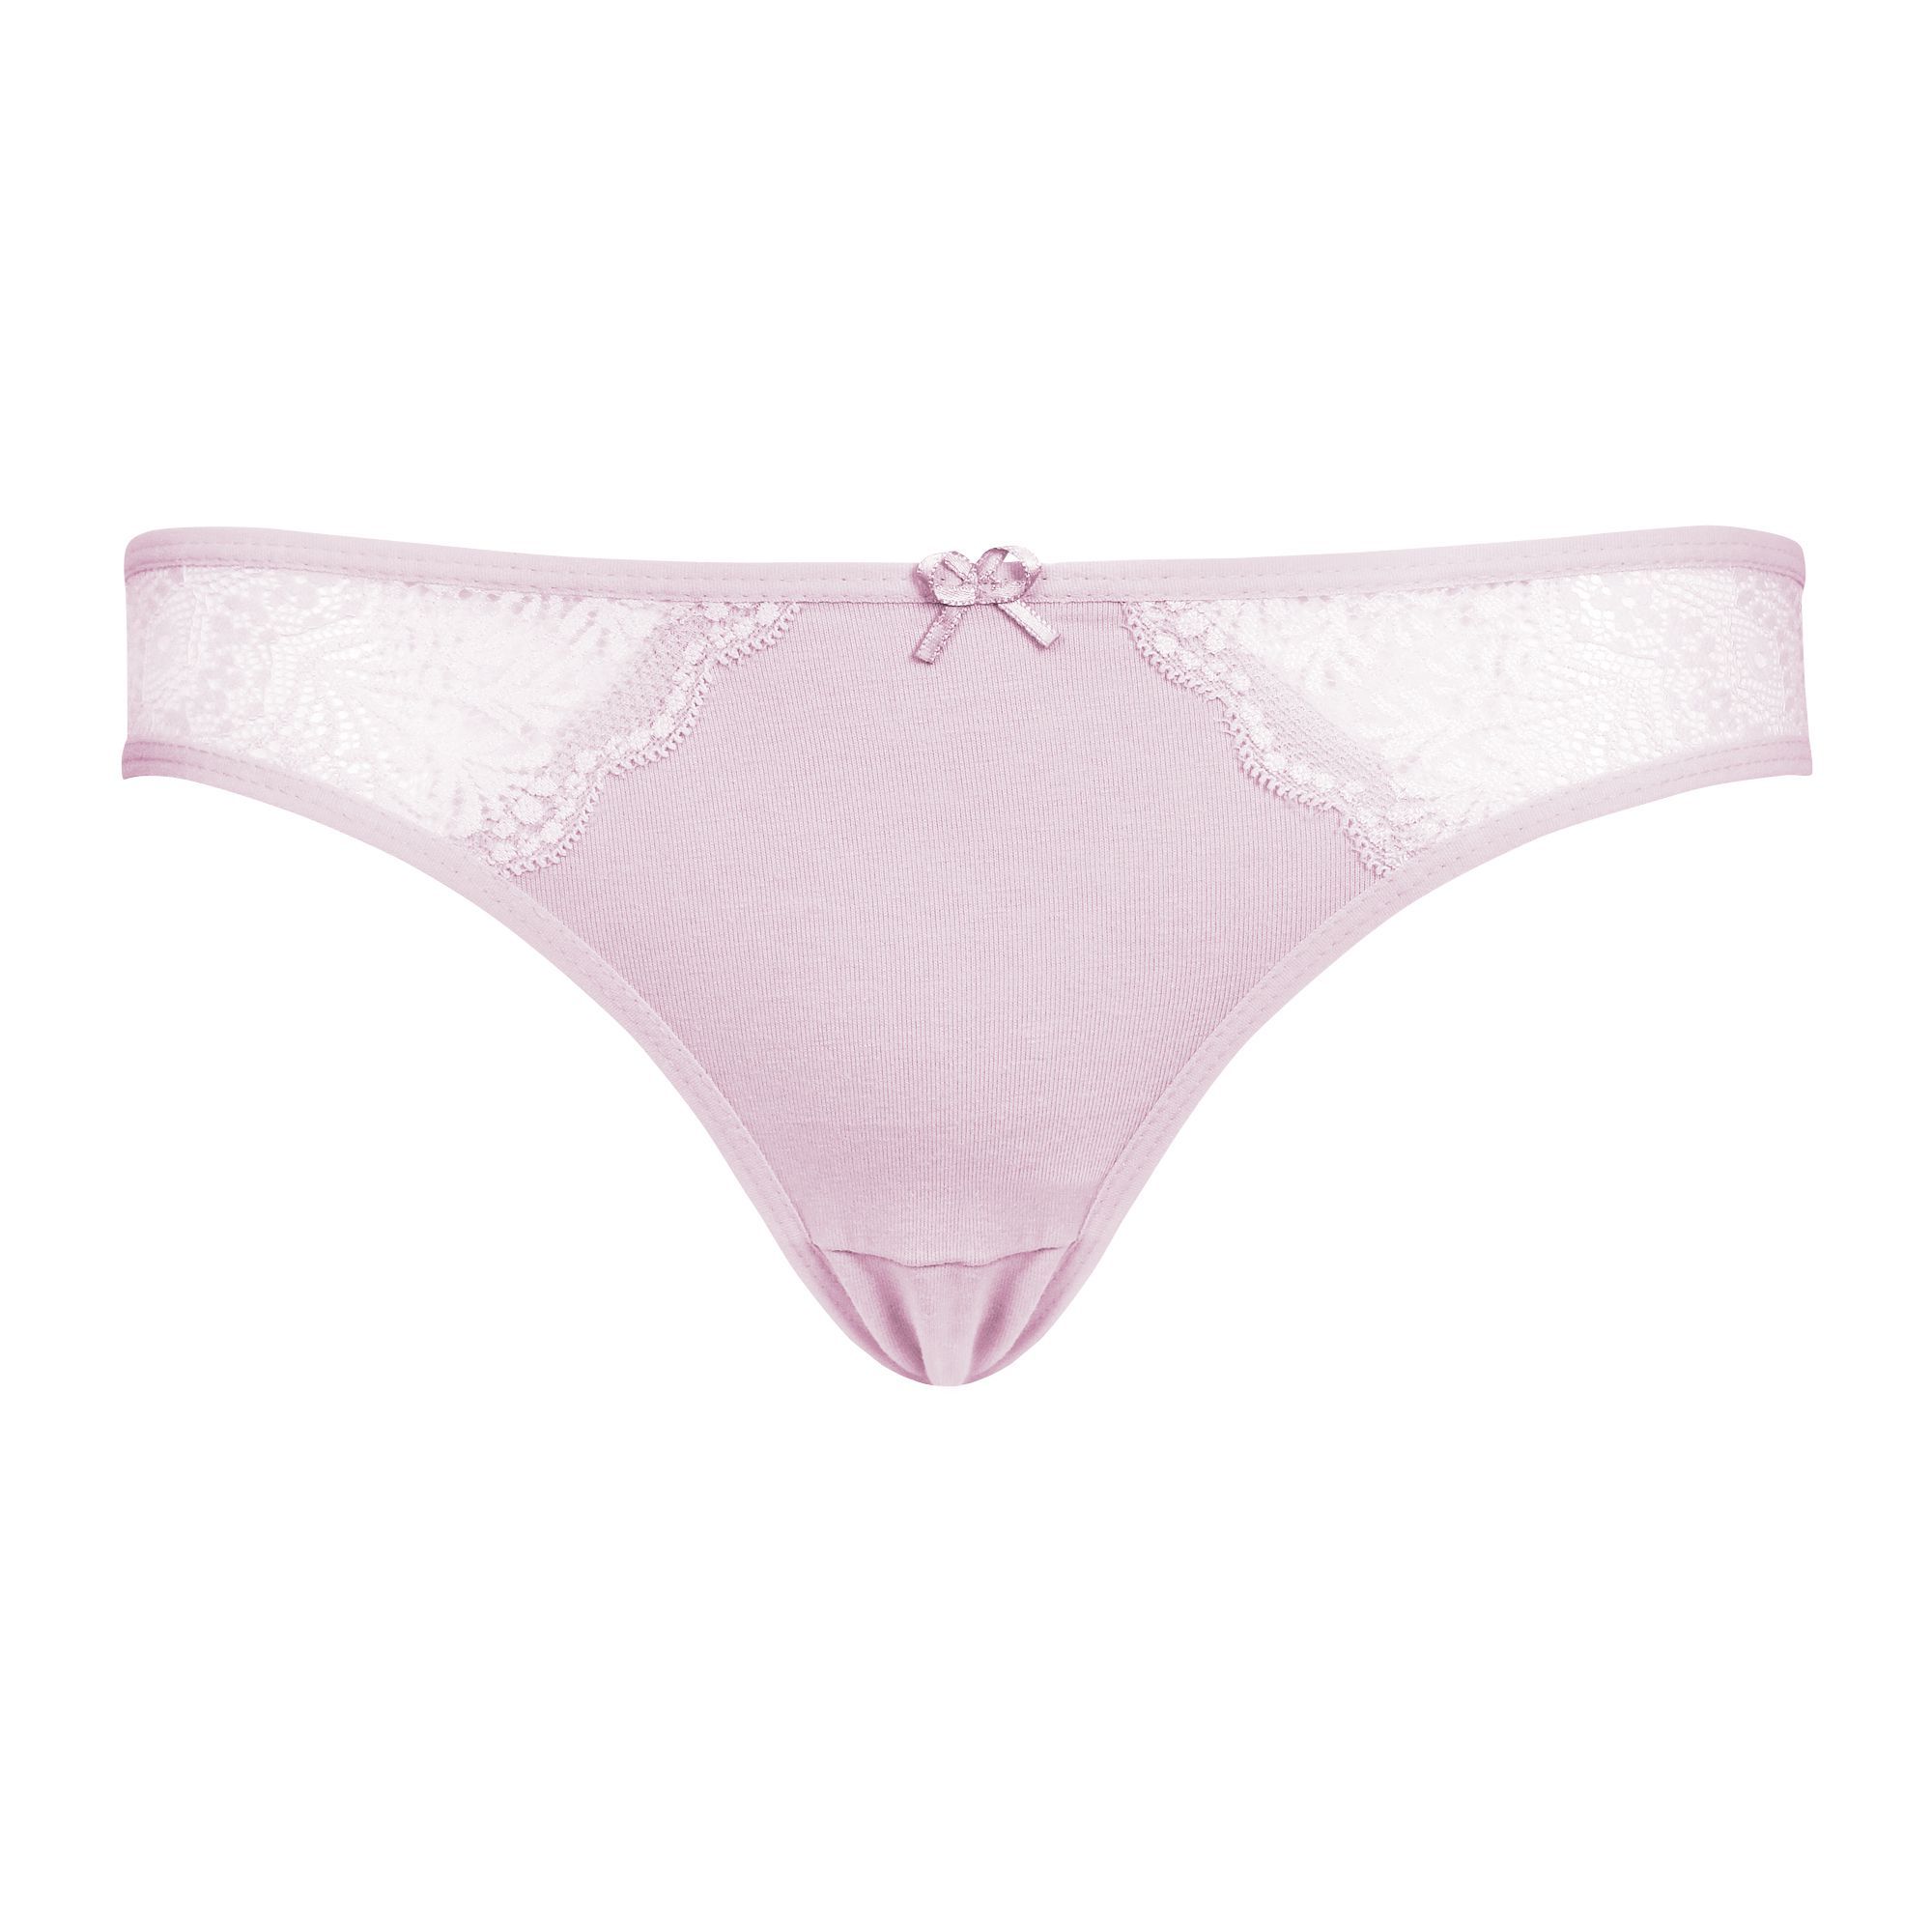 Purchase BLS Poppy Panty, Pink, BLS-217143 Online at Special Price in ...